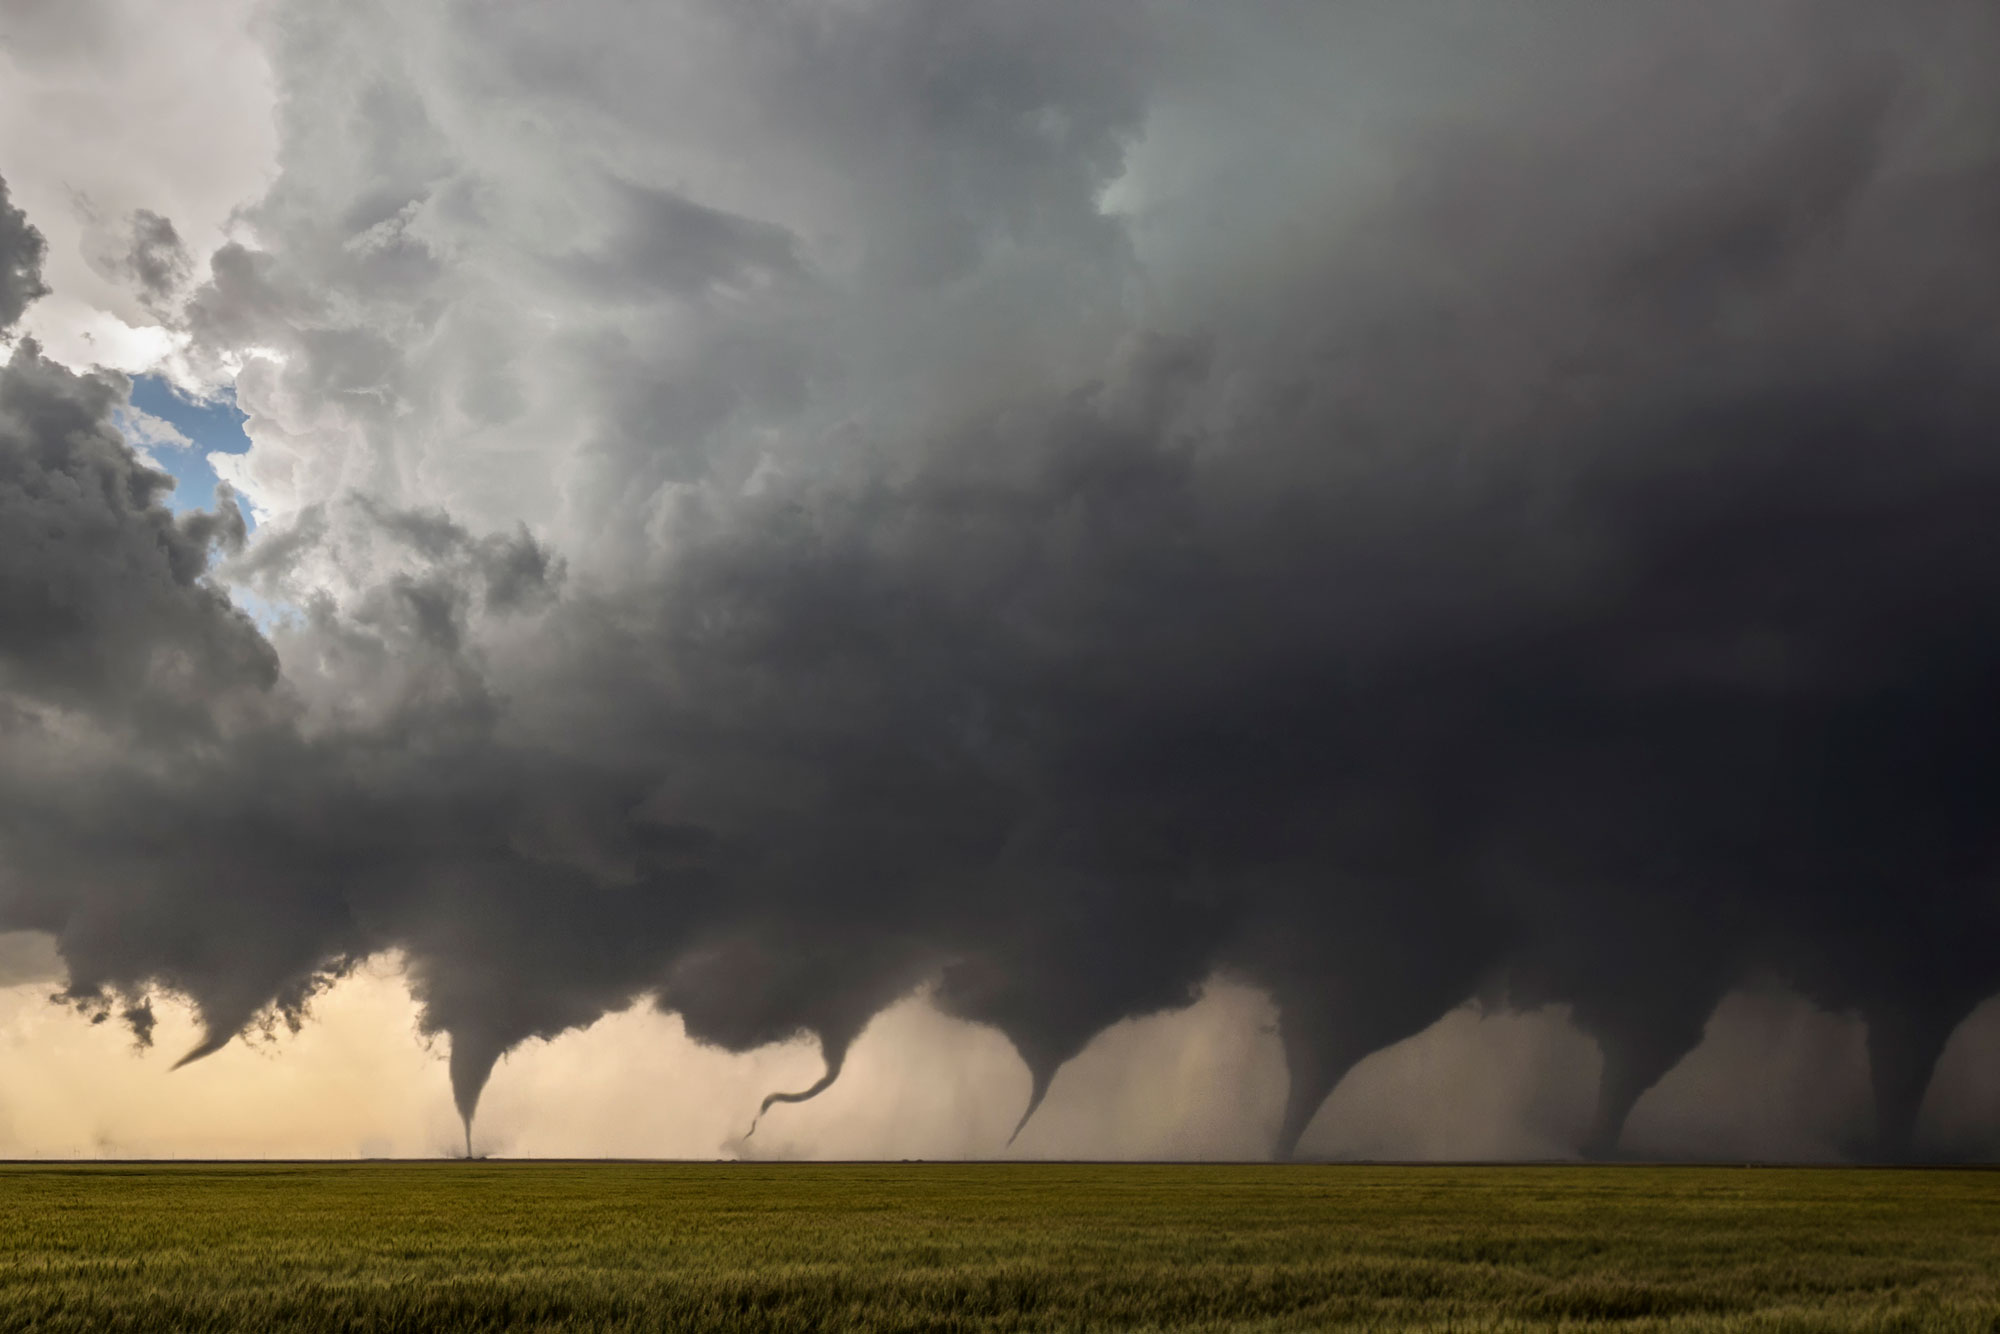 Photomontage of a tornado forming in a field and touching down on the ground north of Minneola, Kansas.